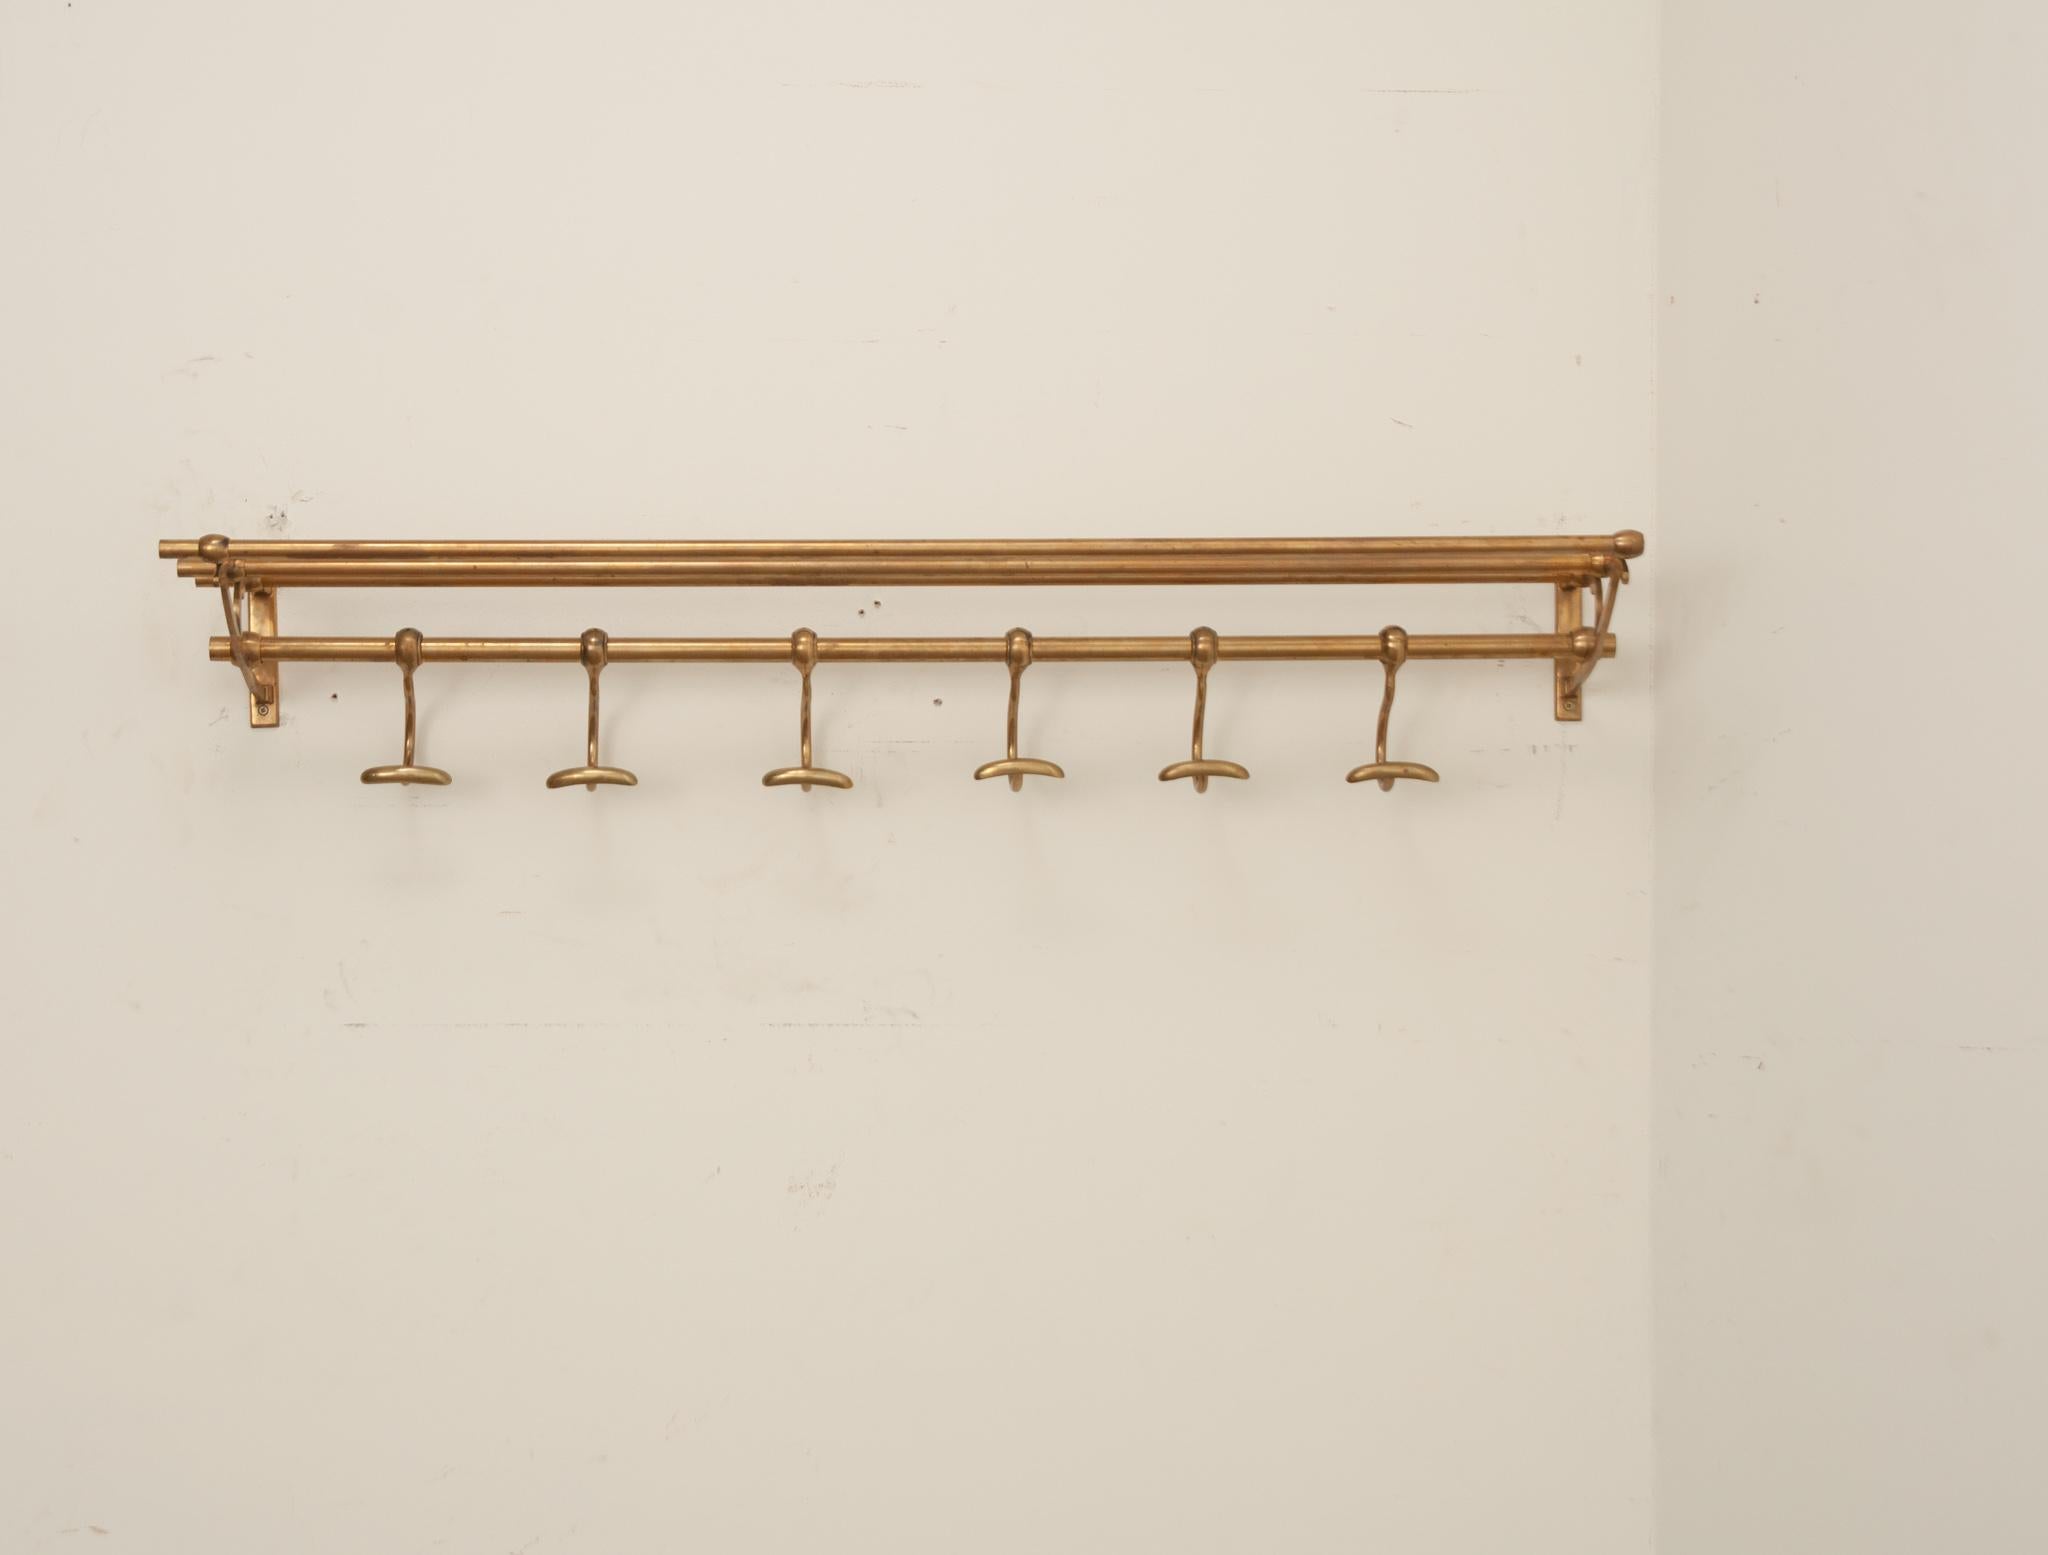 A French early 20th Century brass train rack is the perfect shelf by your door or in your bathroom. The 11 1/2” top shelf is deep enough for hats or towels. There are six slidable hooks for hanging coats or towels. Be sure to view the detailed